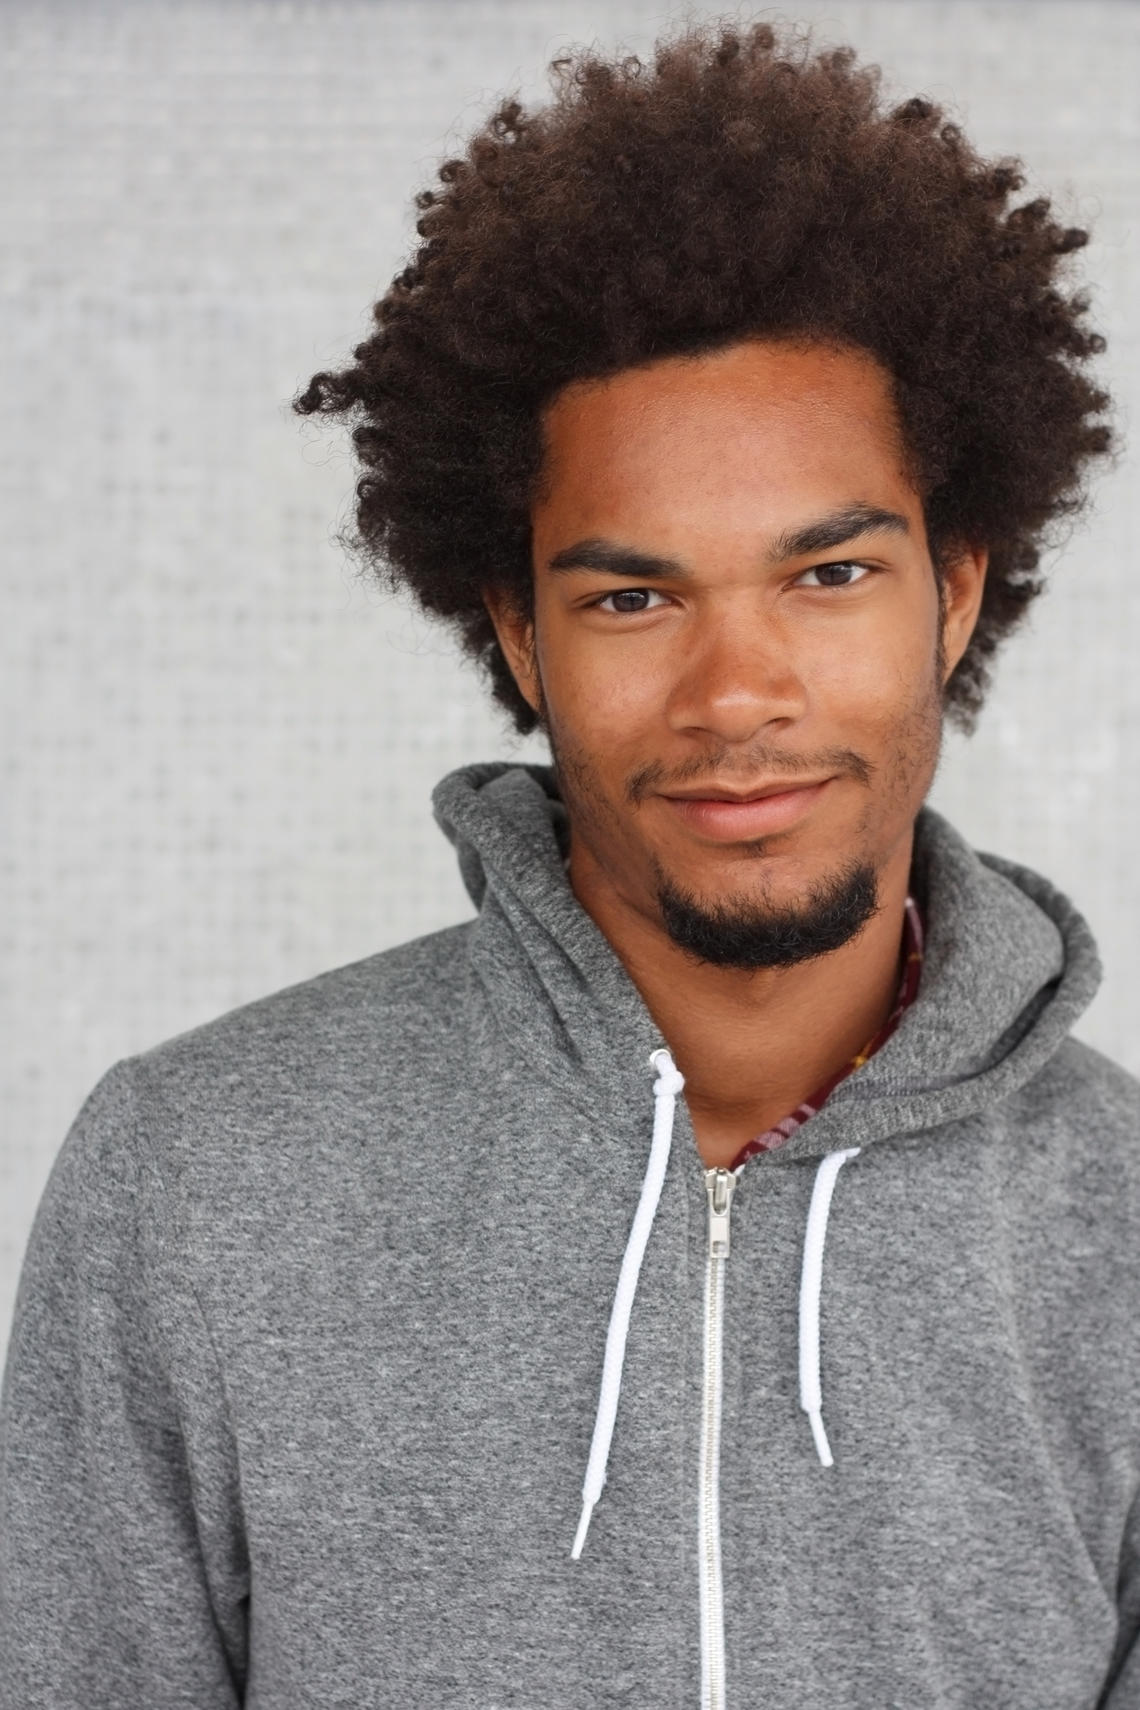 Portrait of a Man smiling with curly black hair. He is wearing a grey hoodie